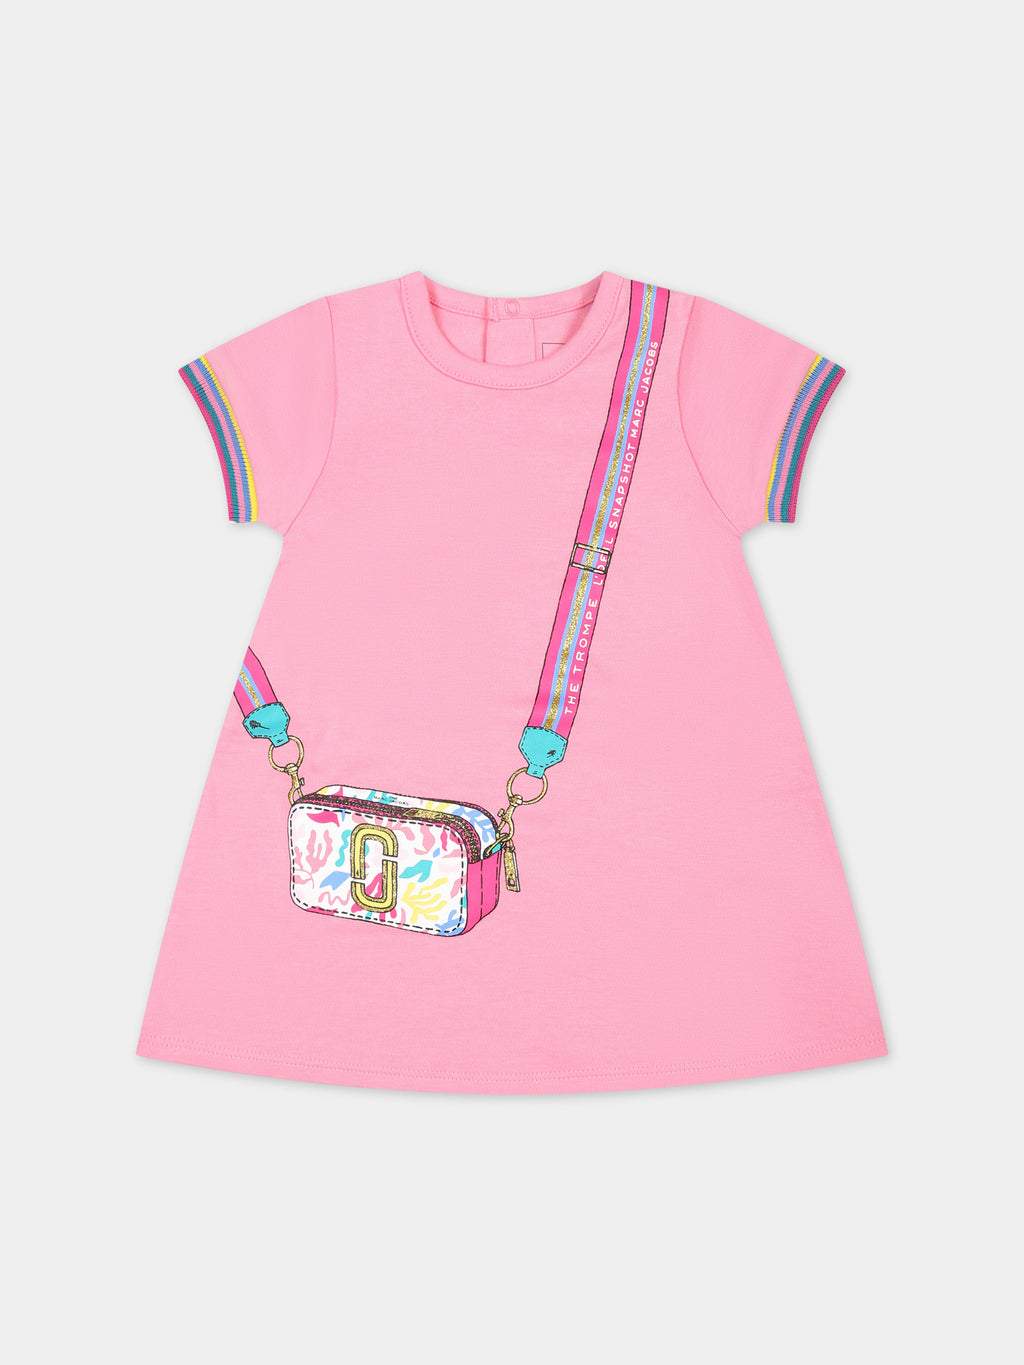 Pink dress for baby girl with bag print and logo